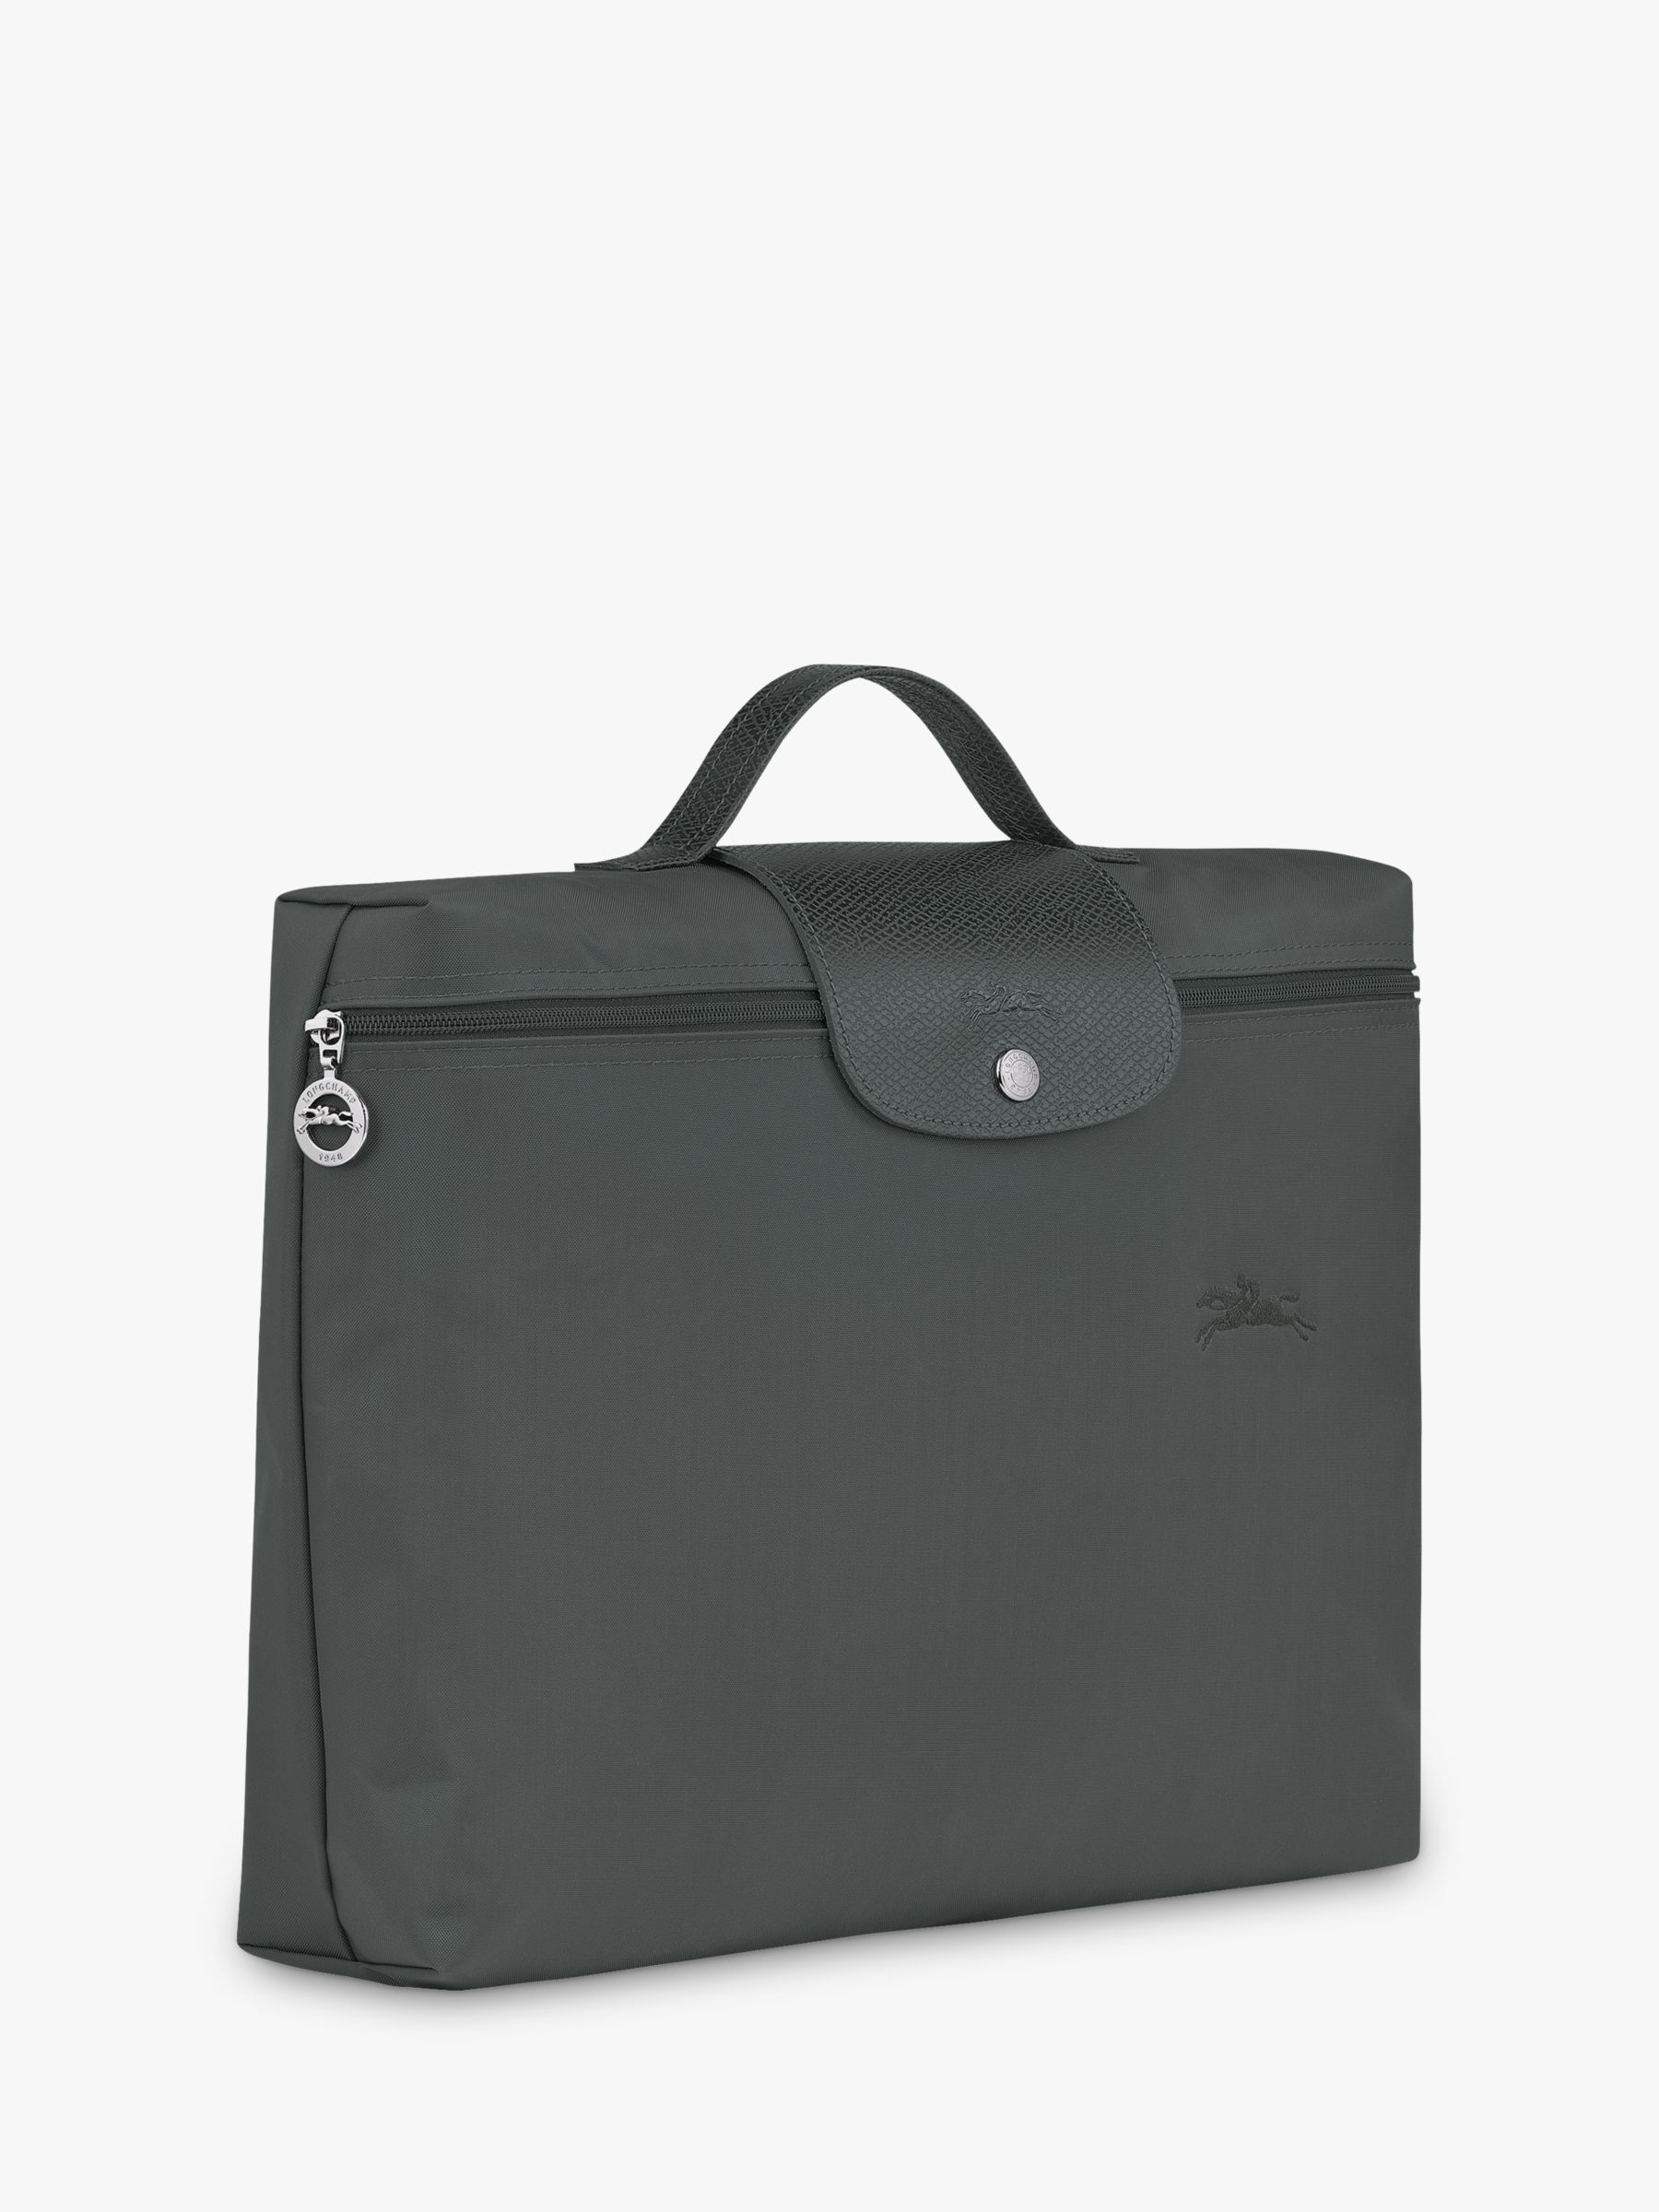 Buy Longchamp Le Pliage Green Recycled Canvas Briefcase Online at johnlewis.com